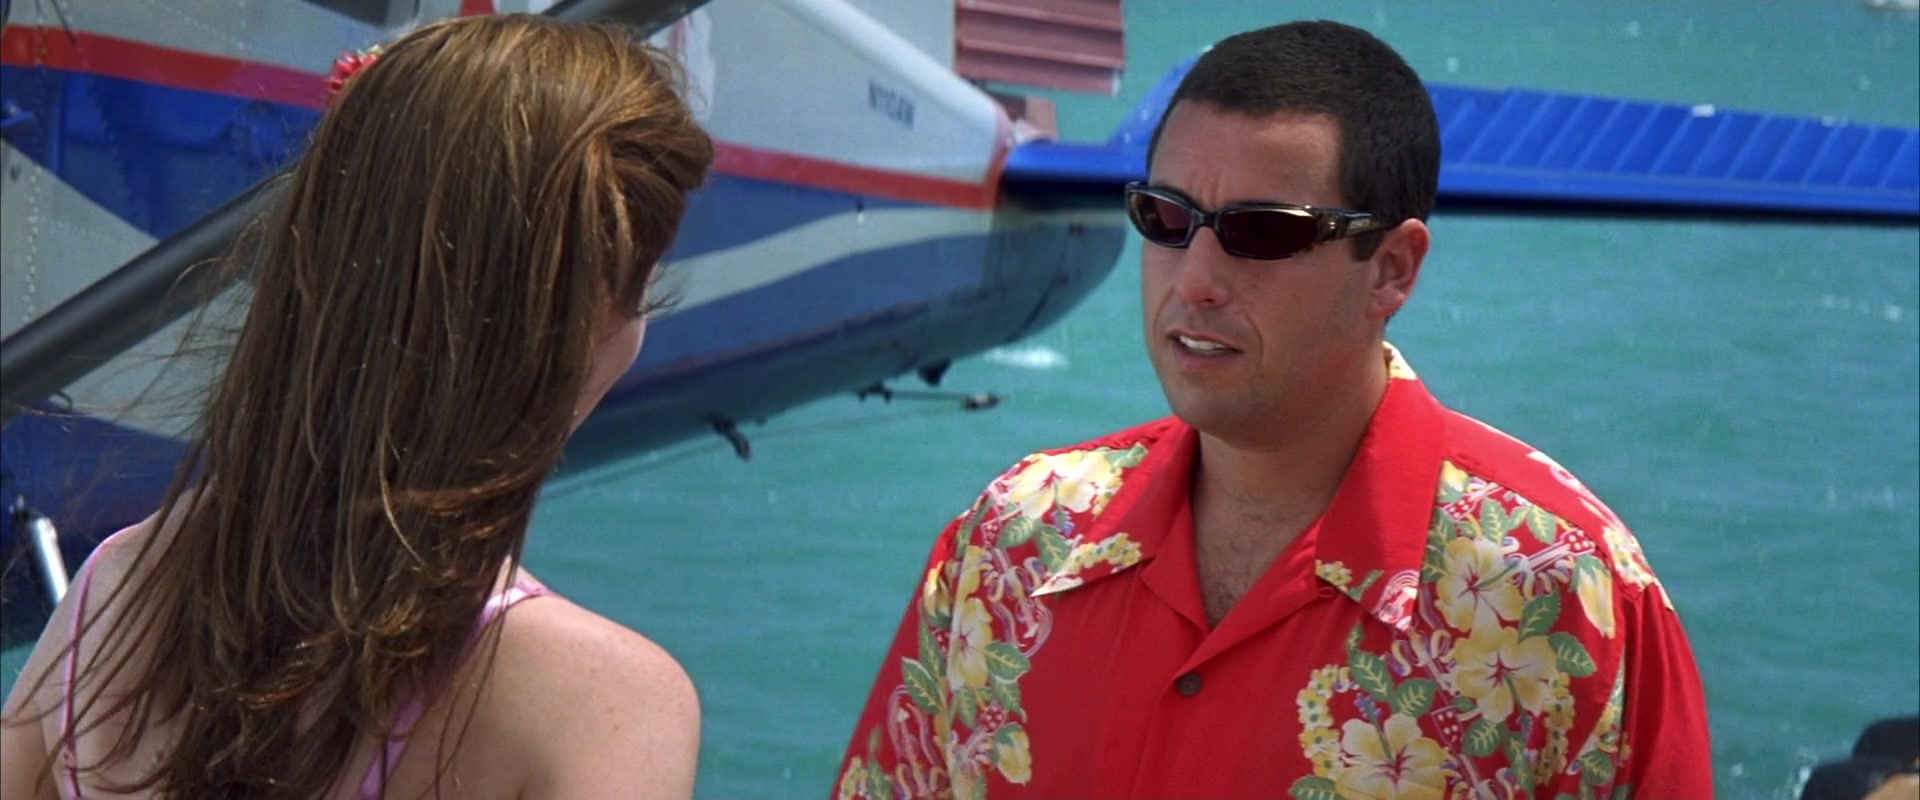 DSO Sunglasses of Adam Sandler as Henry Roth in 50 First Dates (2004) .